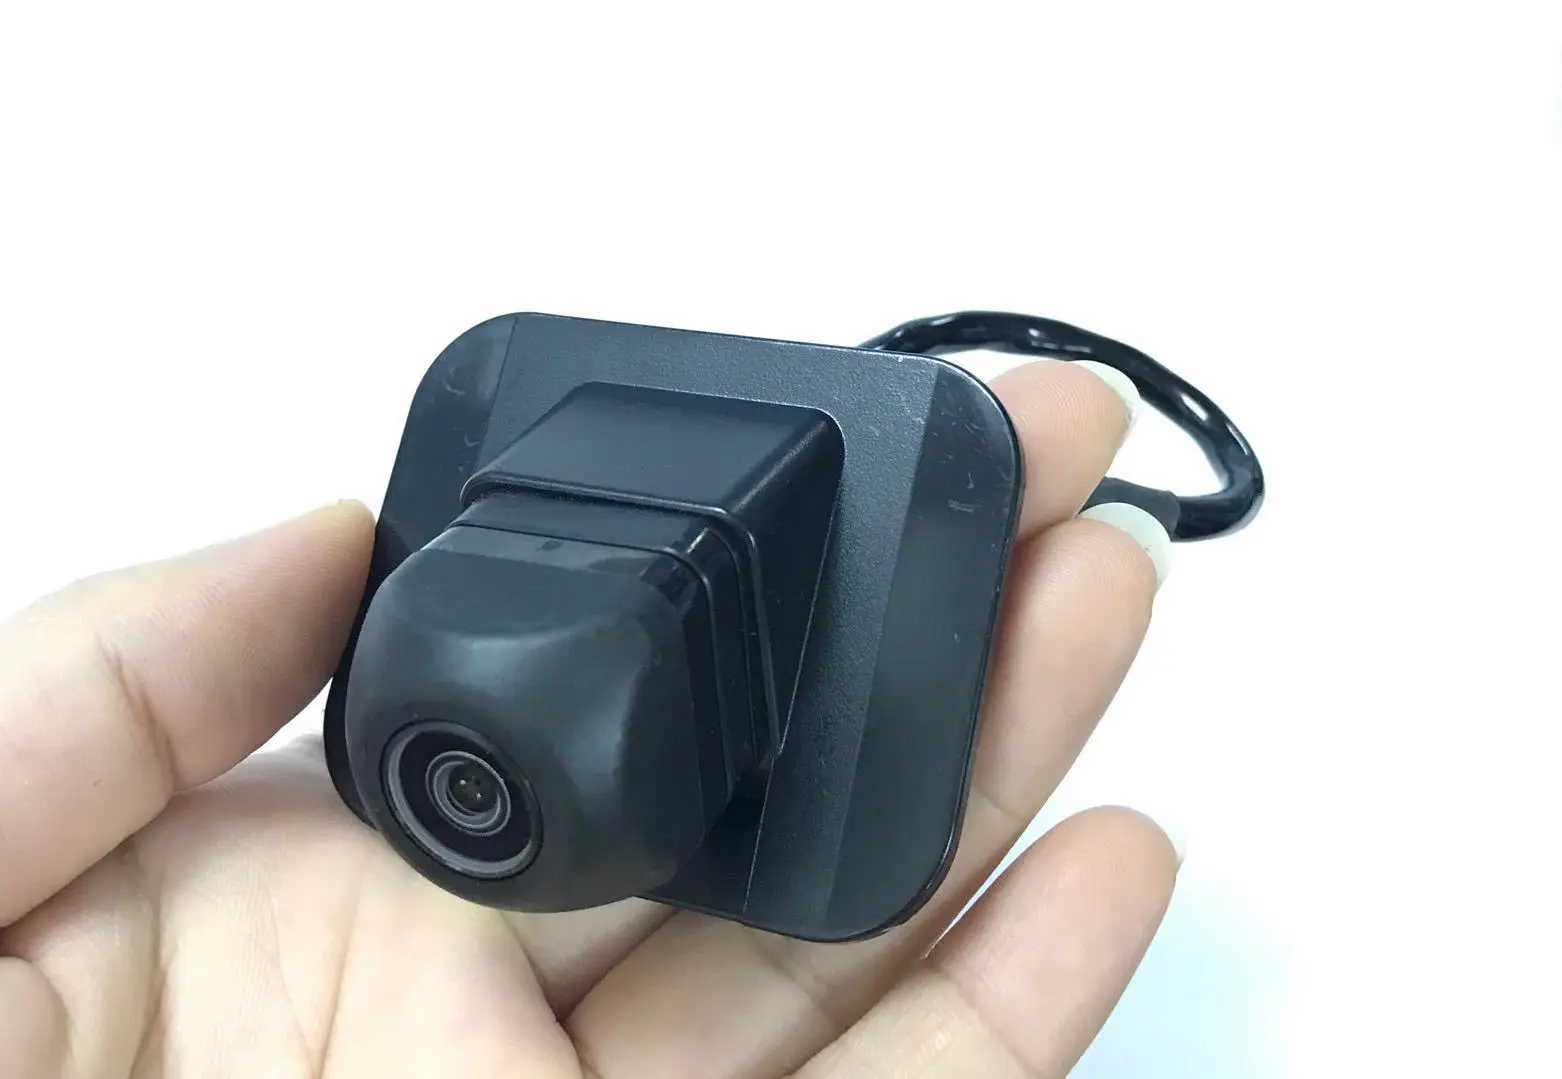 

For 2013-2015 Honda Automobile Electric Eye Sensor Wired Waterproof Car Accessories Rear View Camera Assembly 39530-TR3-A51